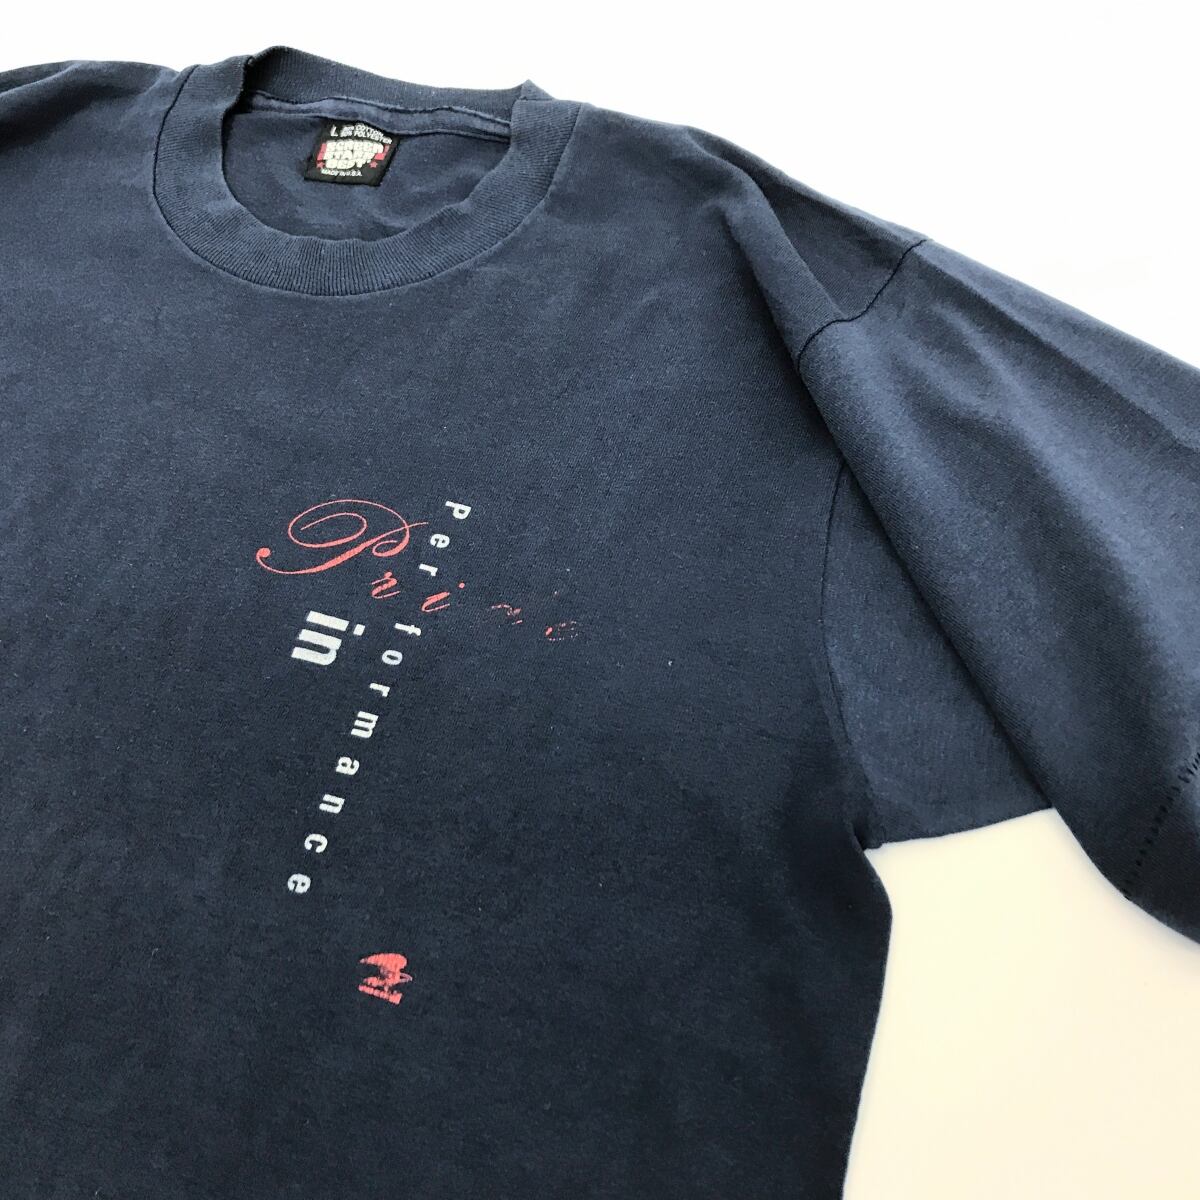 90s USA製 screen sters tシャツ スーベニア